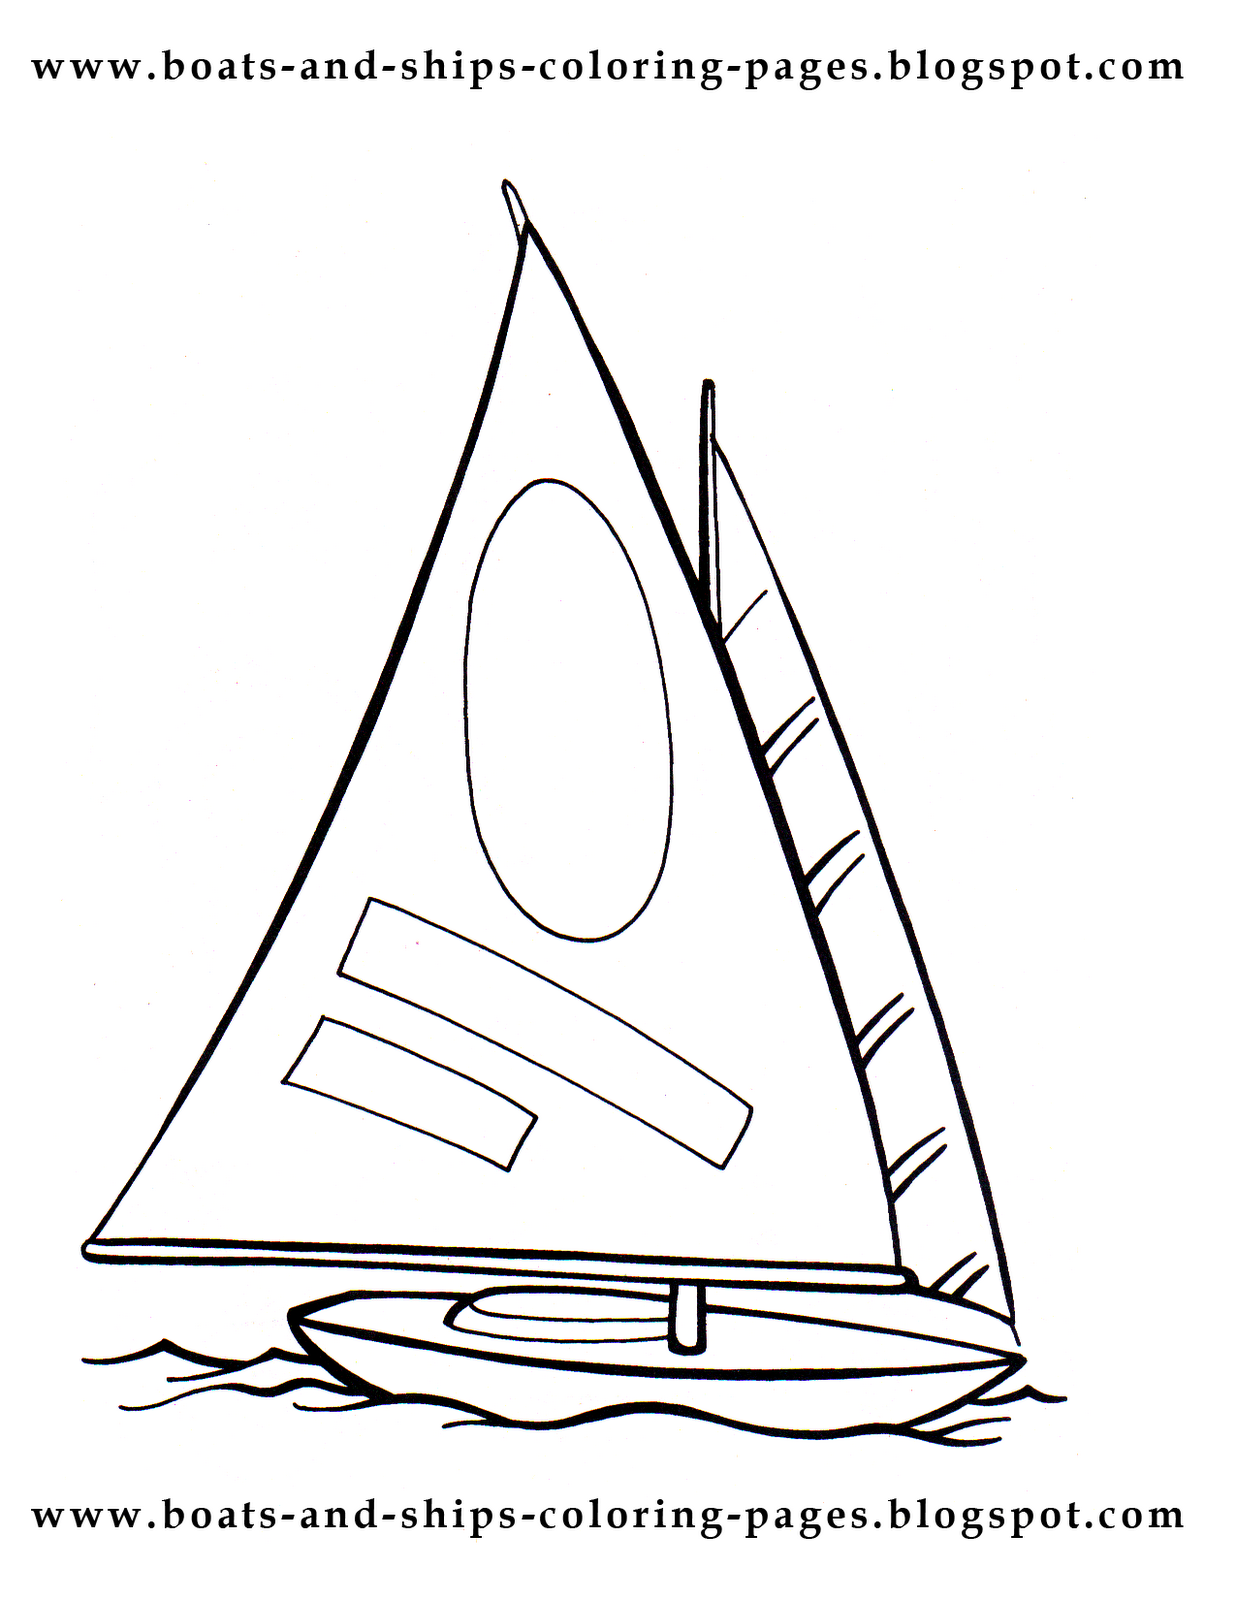 jacques cartier boat coloring pages - photo #20